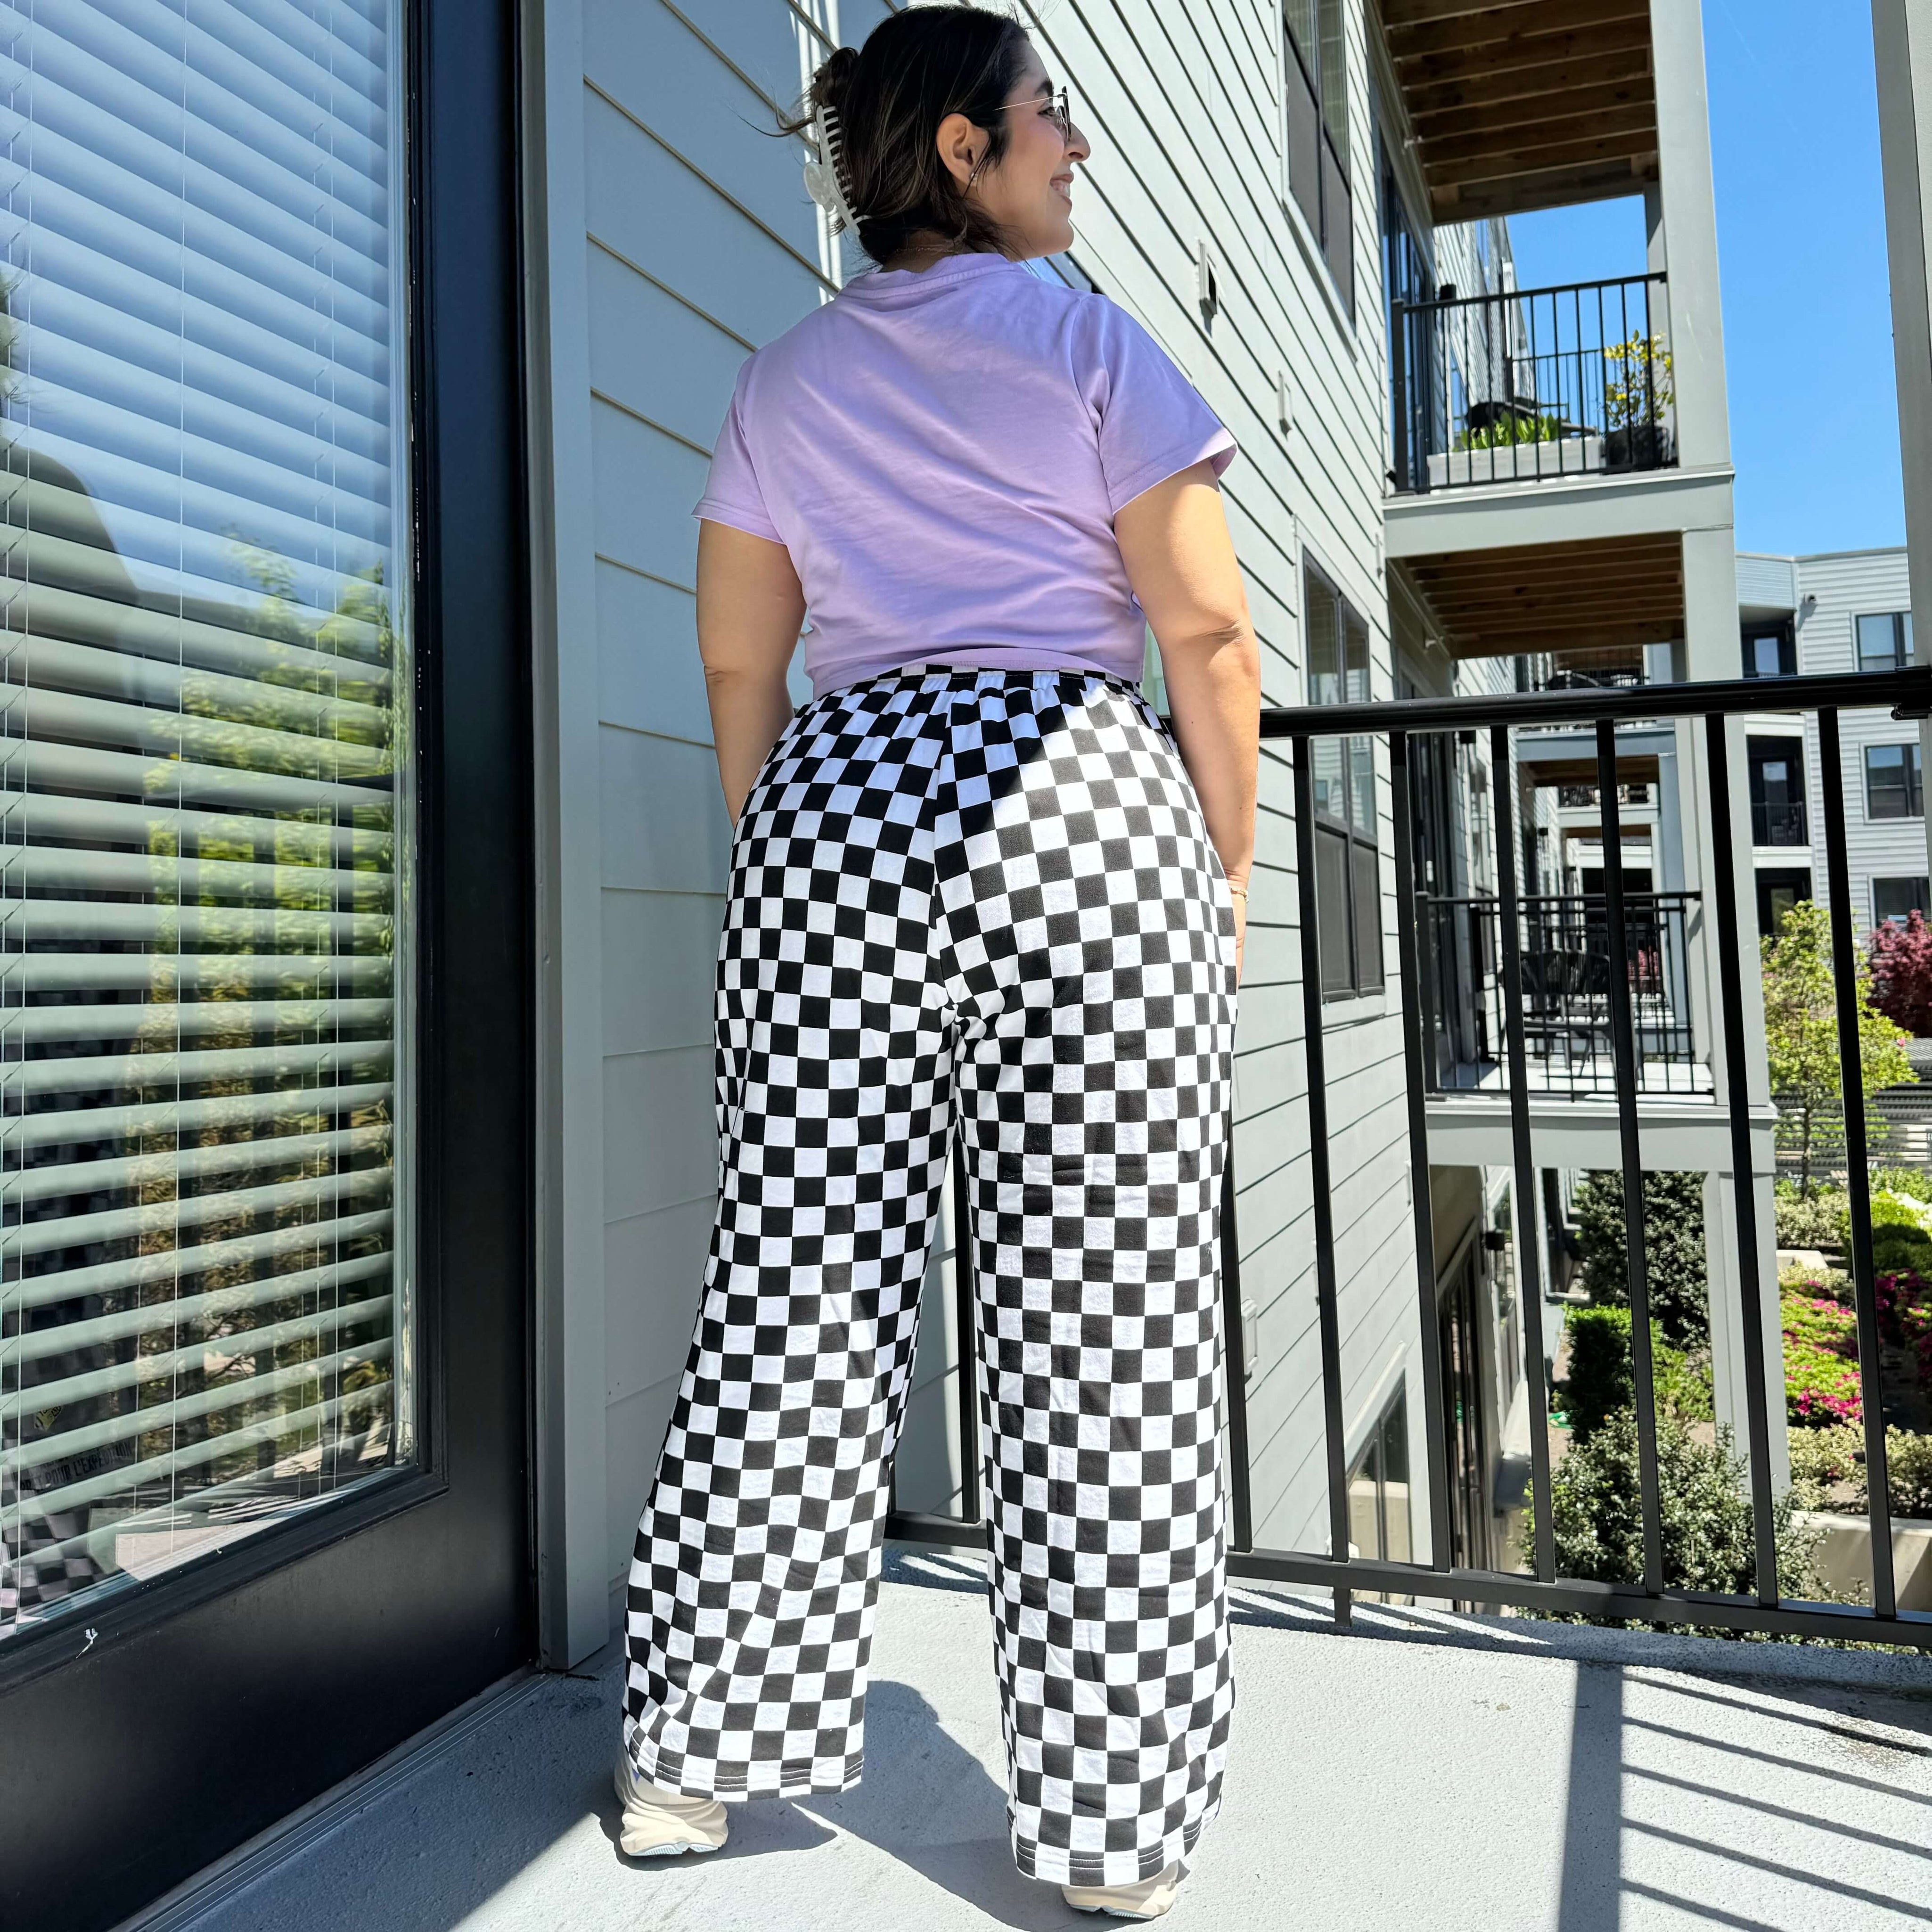 29" Inseam Be Yourself Pants - Black Checker